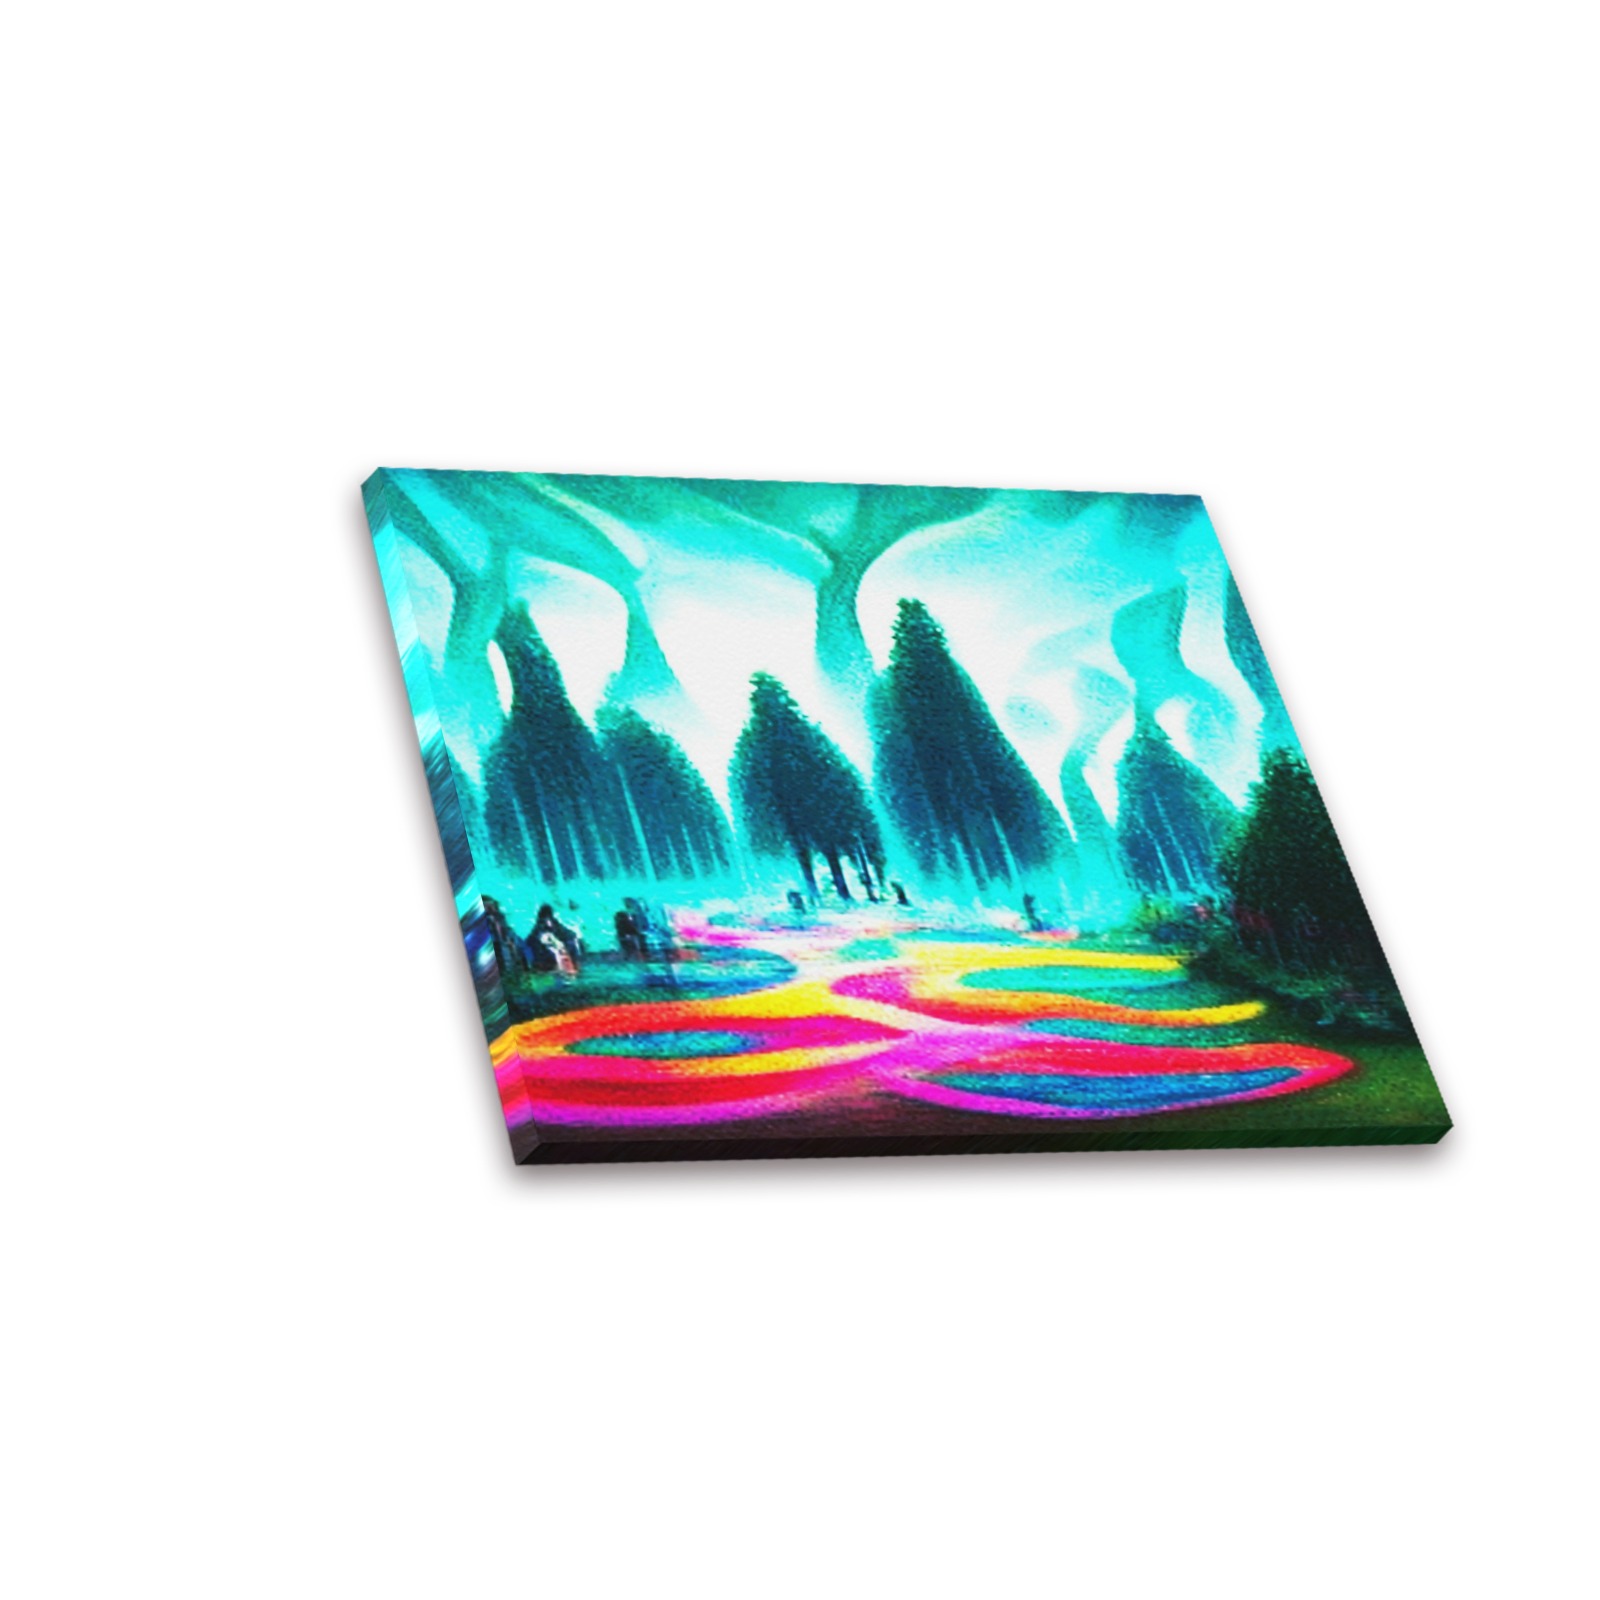 psychedelic forrest 4 Frame Canvas Print 20"x16"